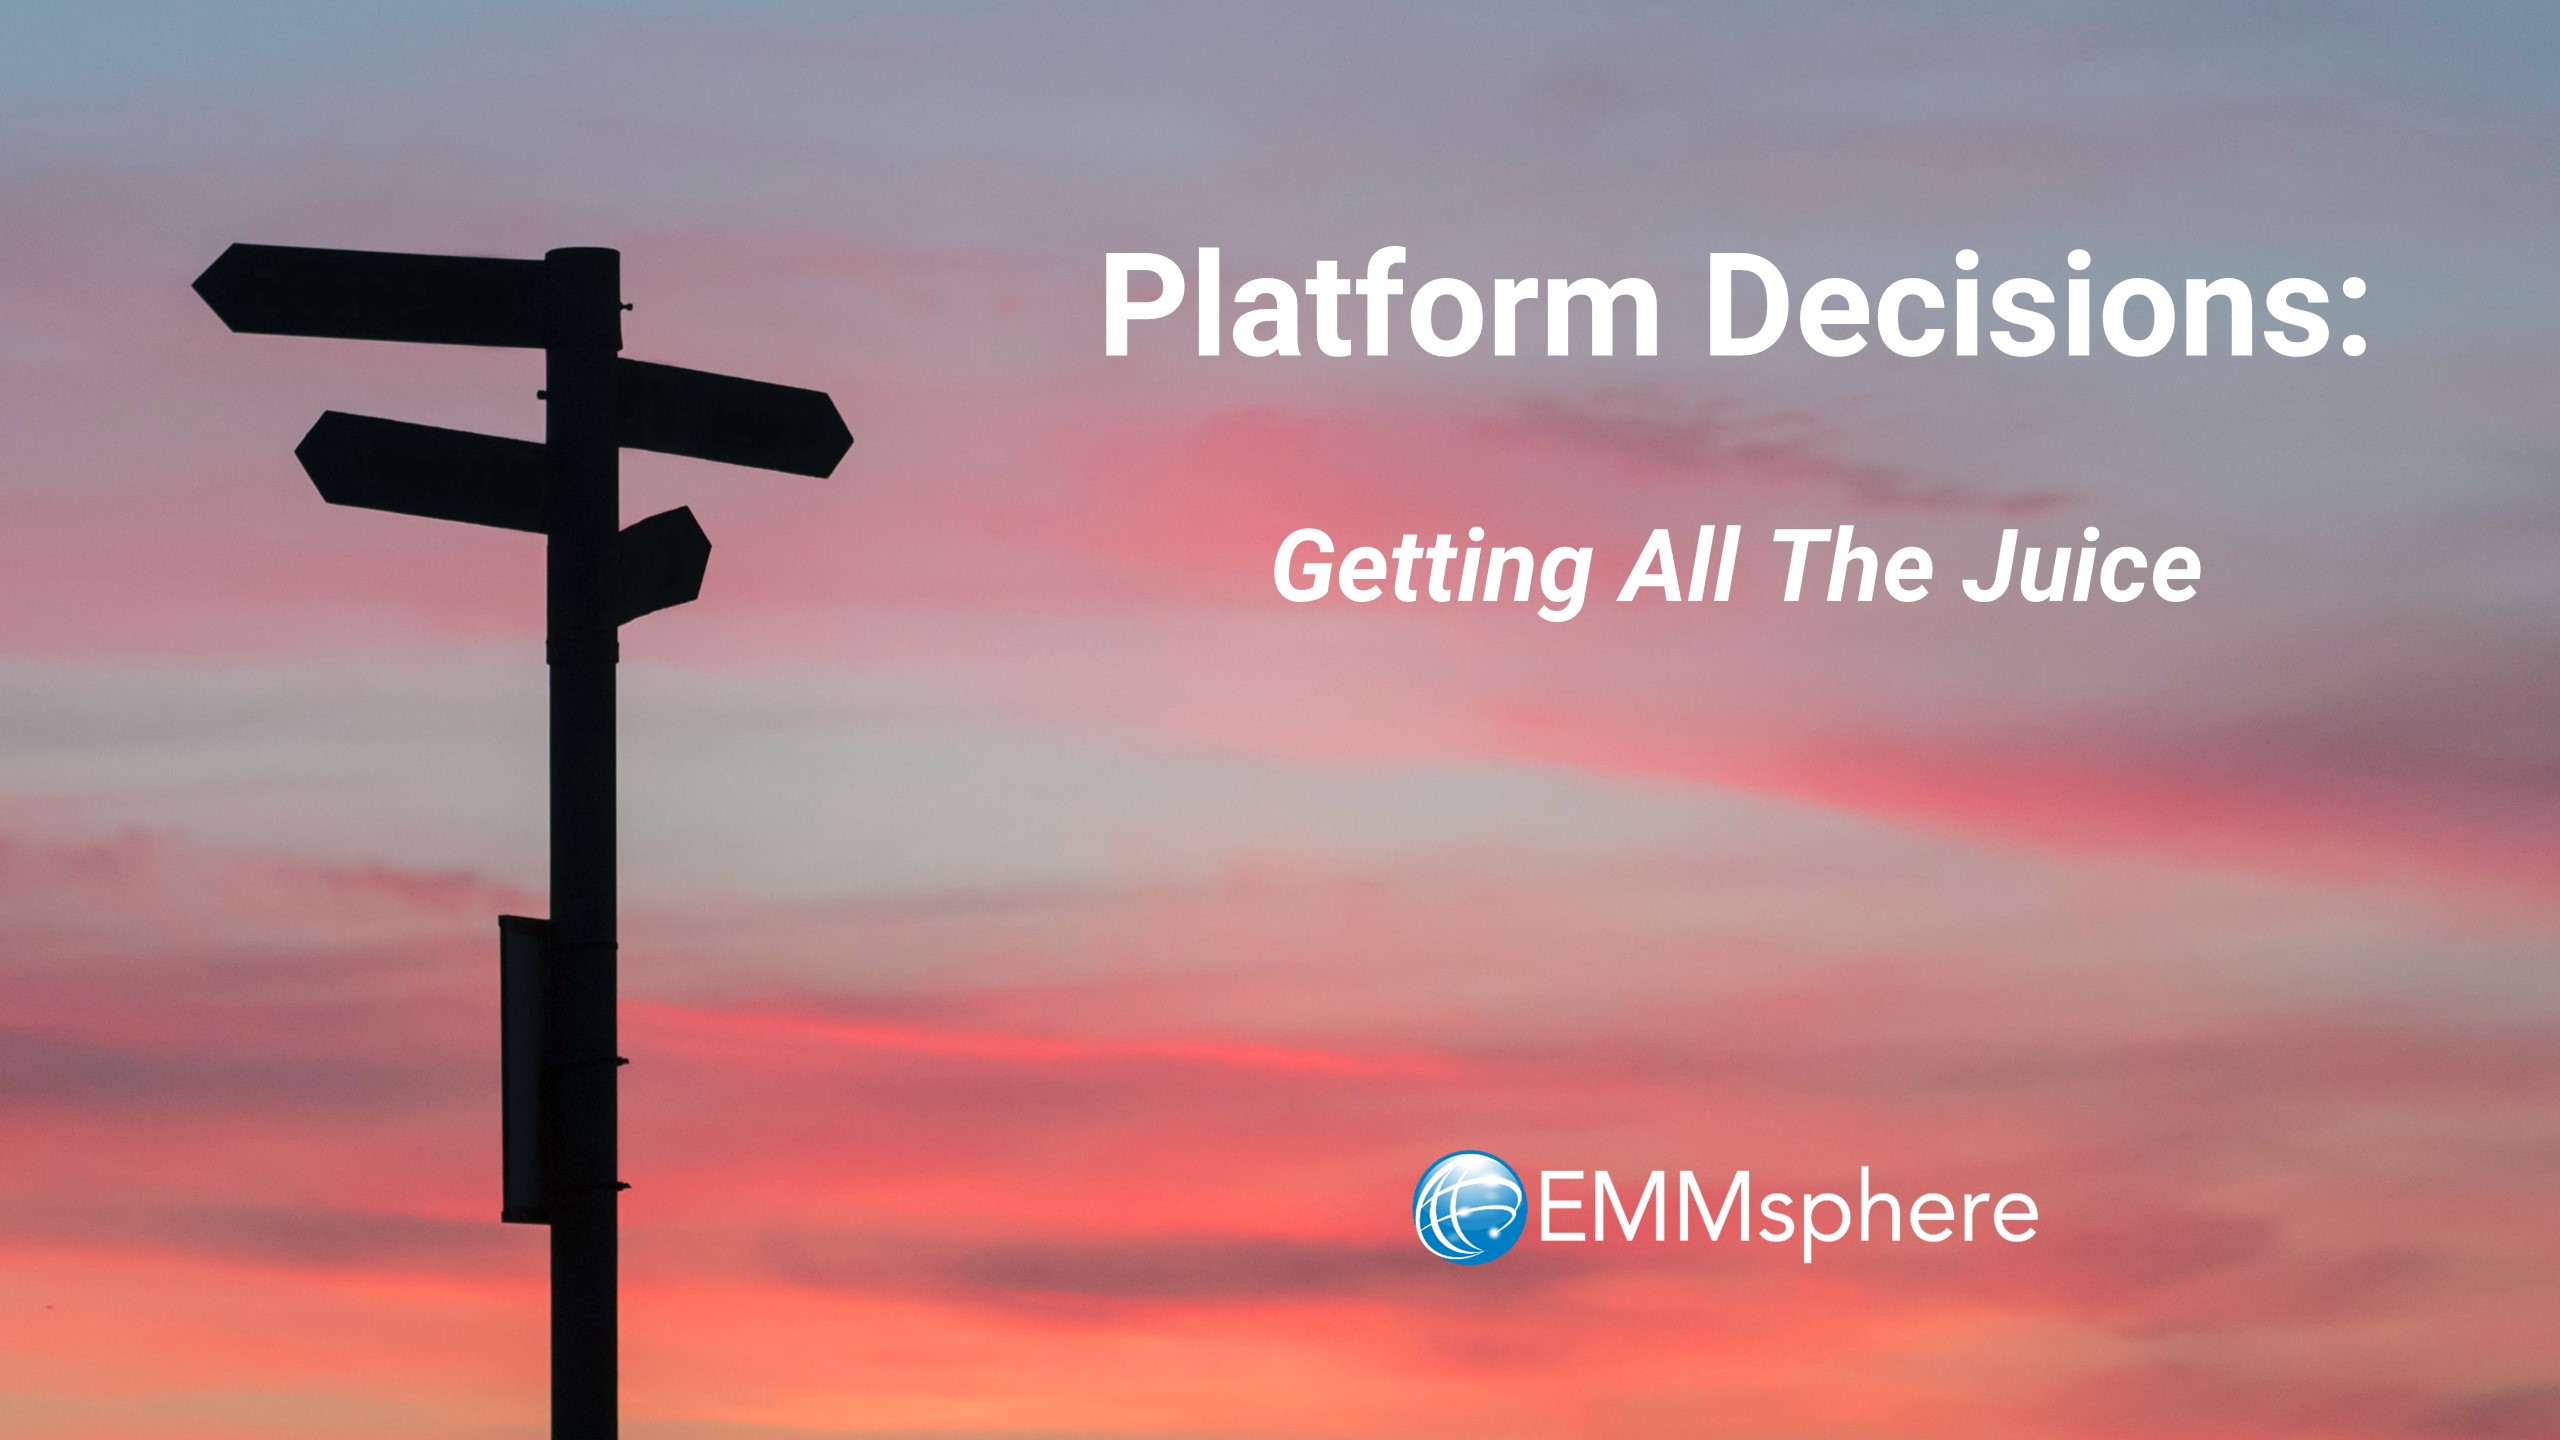 Platform Decisions - Getting All The Juice